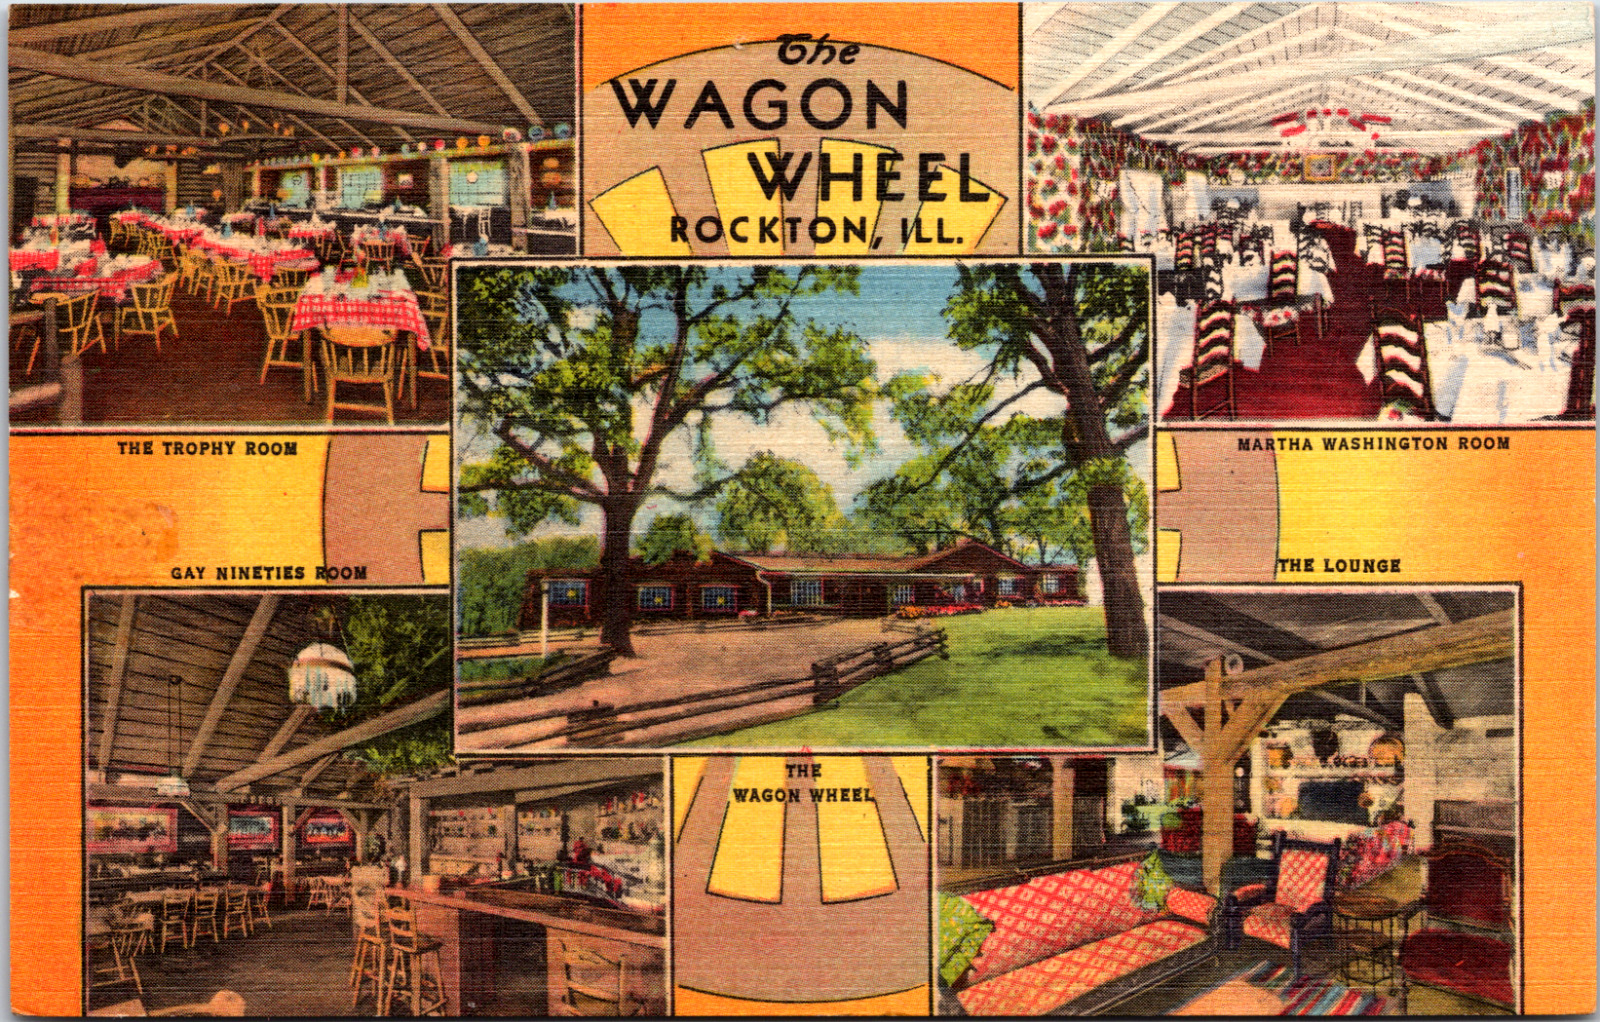 40\'s Rockton IL Restaurant Wagon Wheel Women Only Cooking Dining Bar Exterior